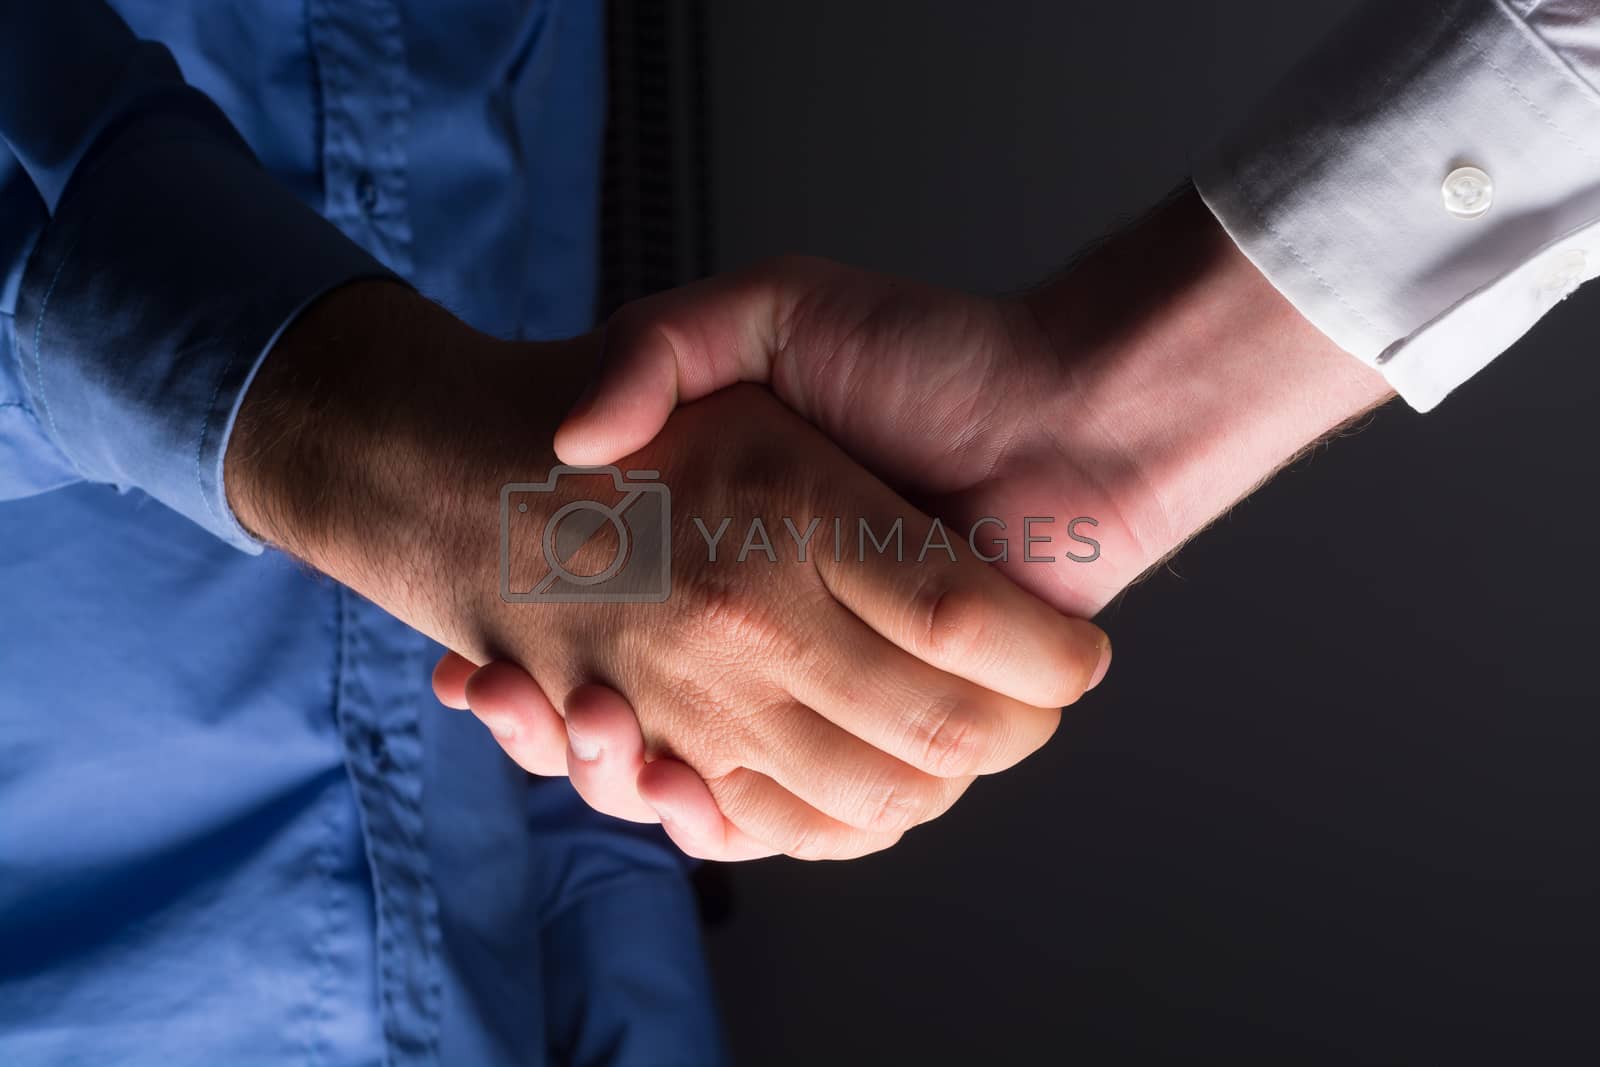 Royalty free image of Two male businessman hands shaking by adamr